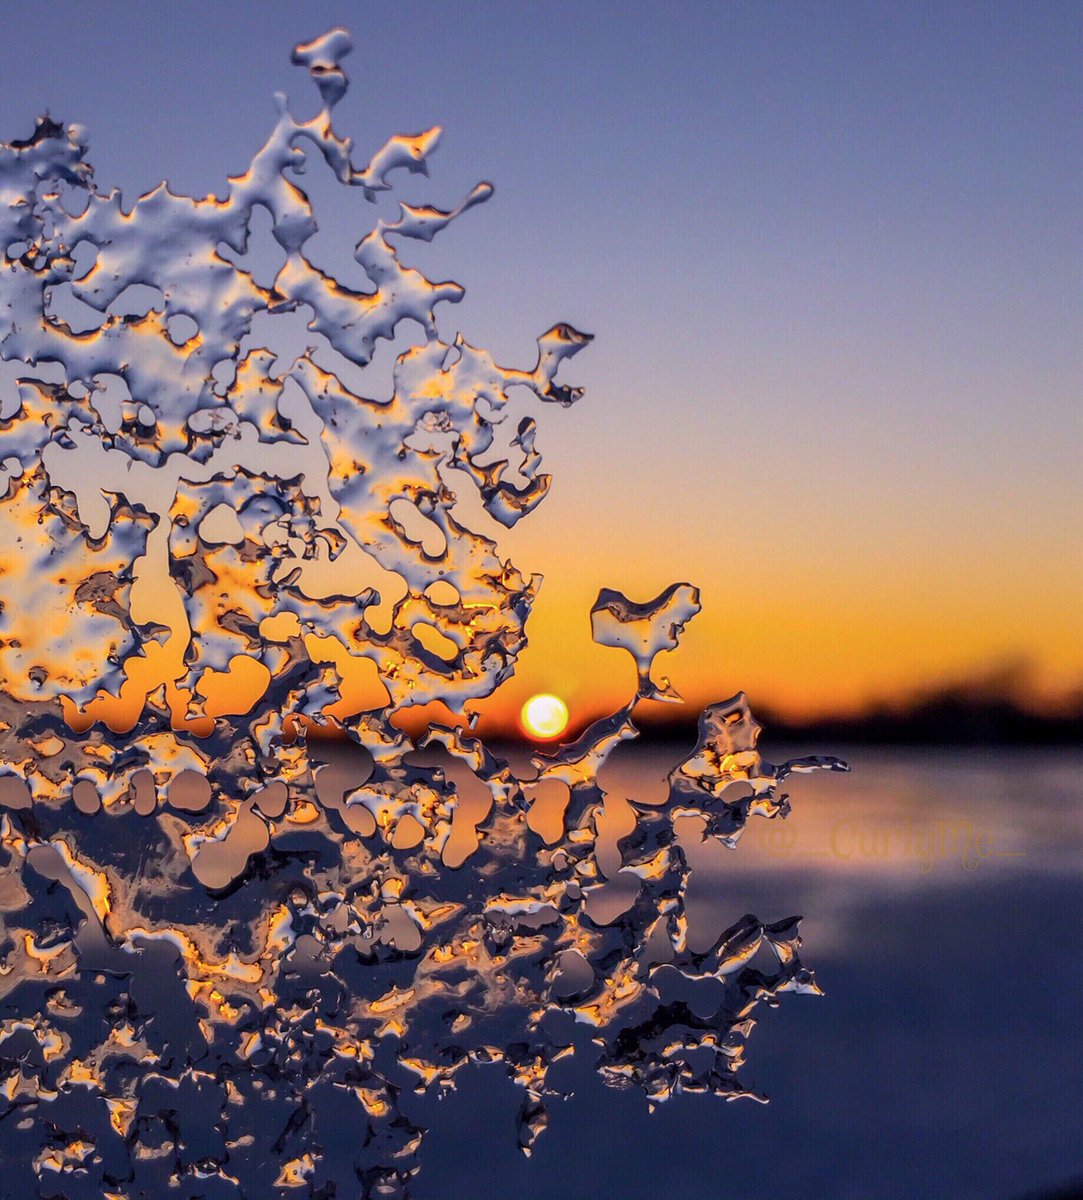 1st Place An icy sunset over the lake. Toronto, Canada by Foxxeh @_CurlyMe_